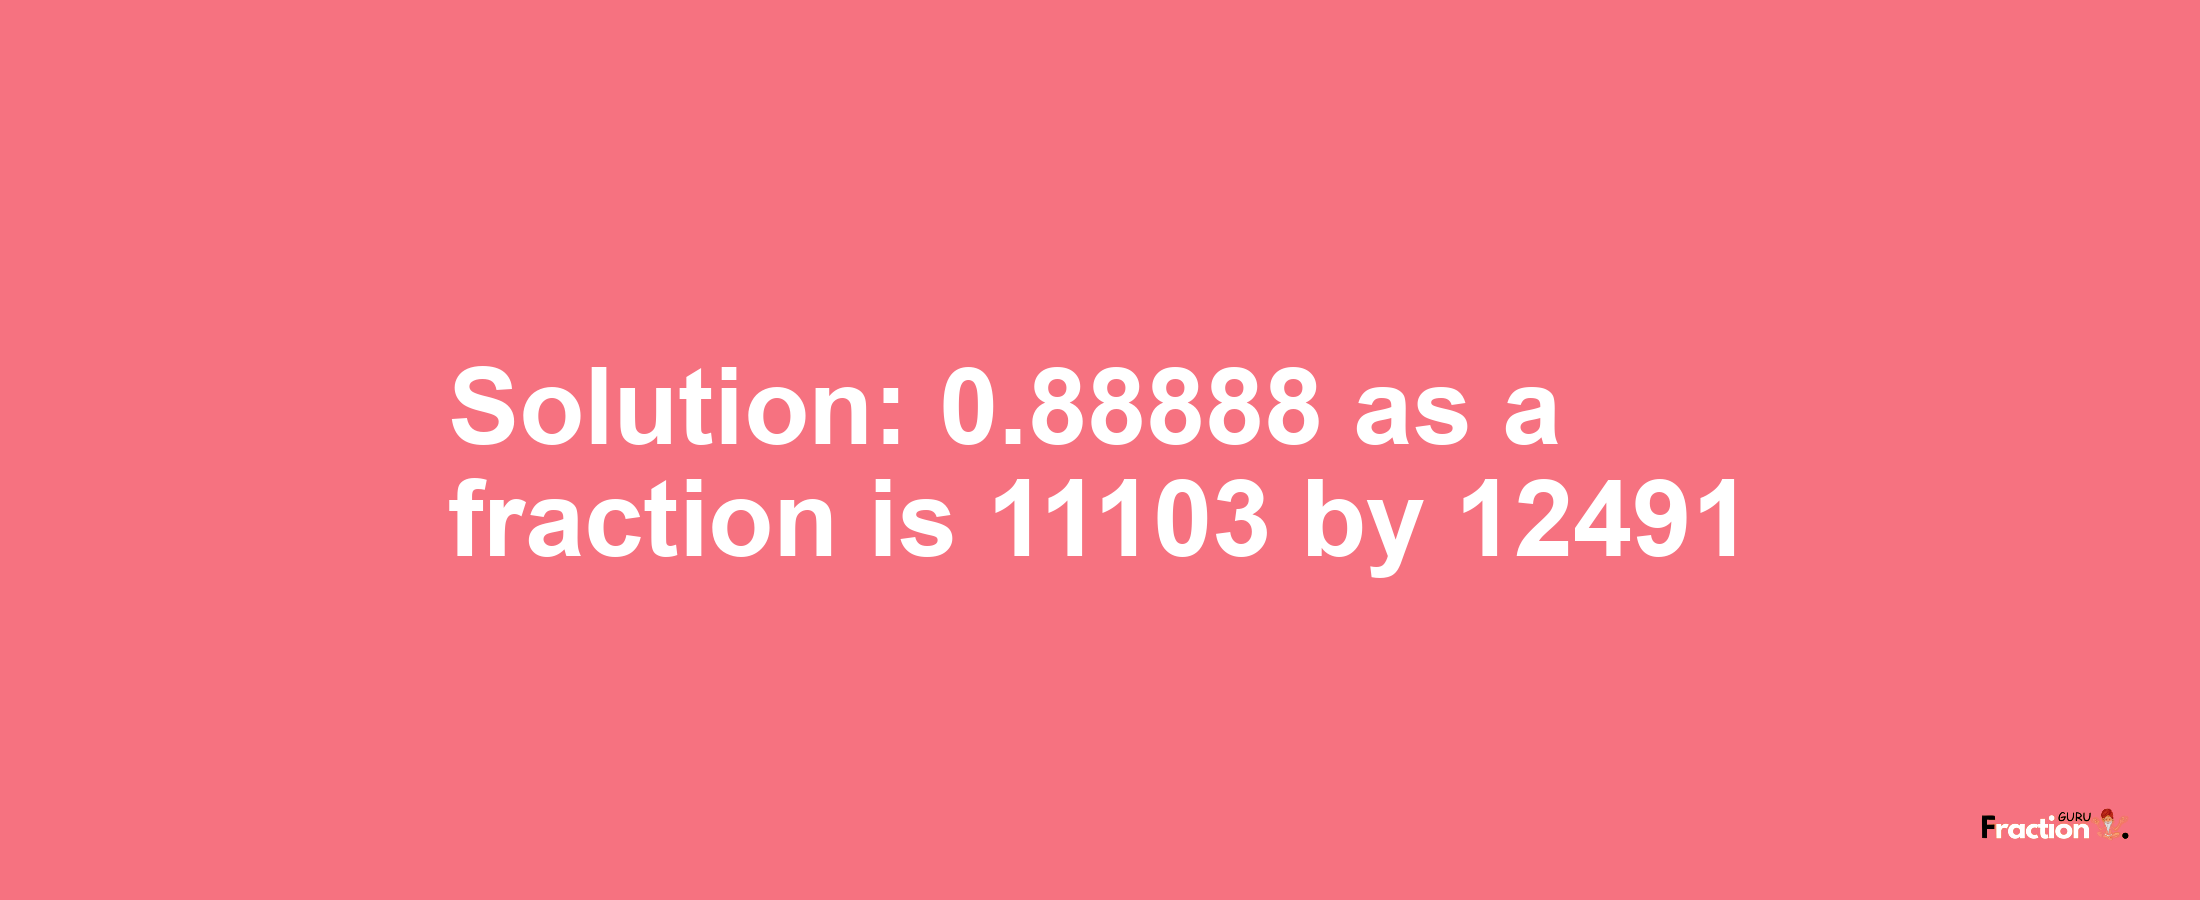 Solution:0.88888 as a fraction is 11103/12491